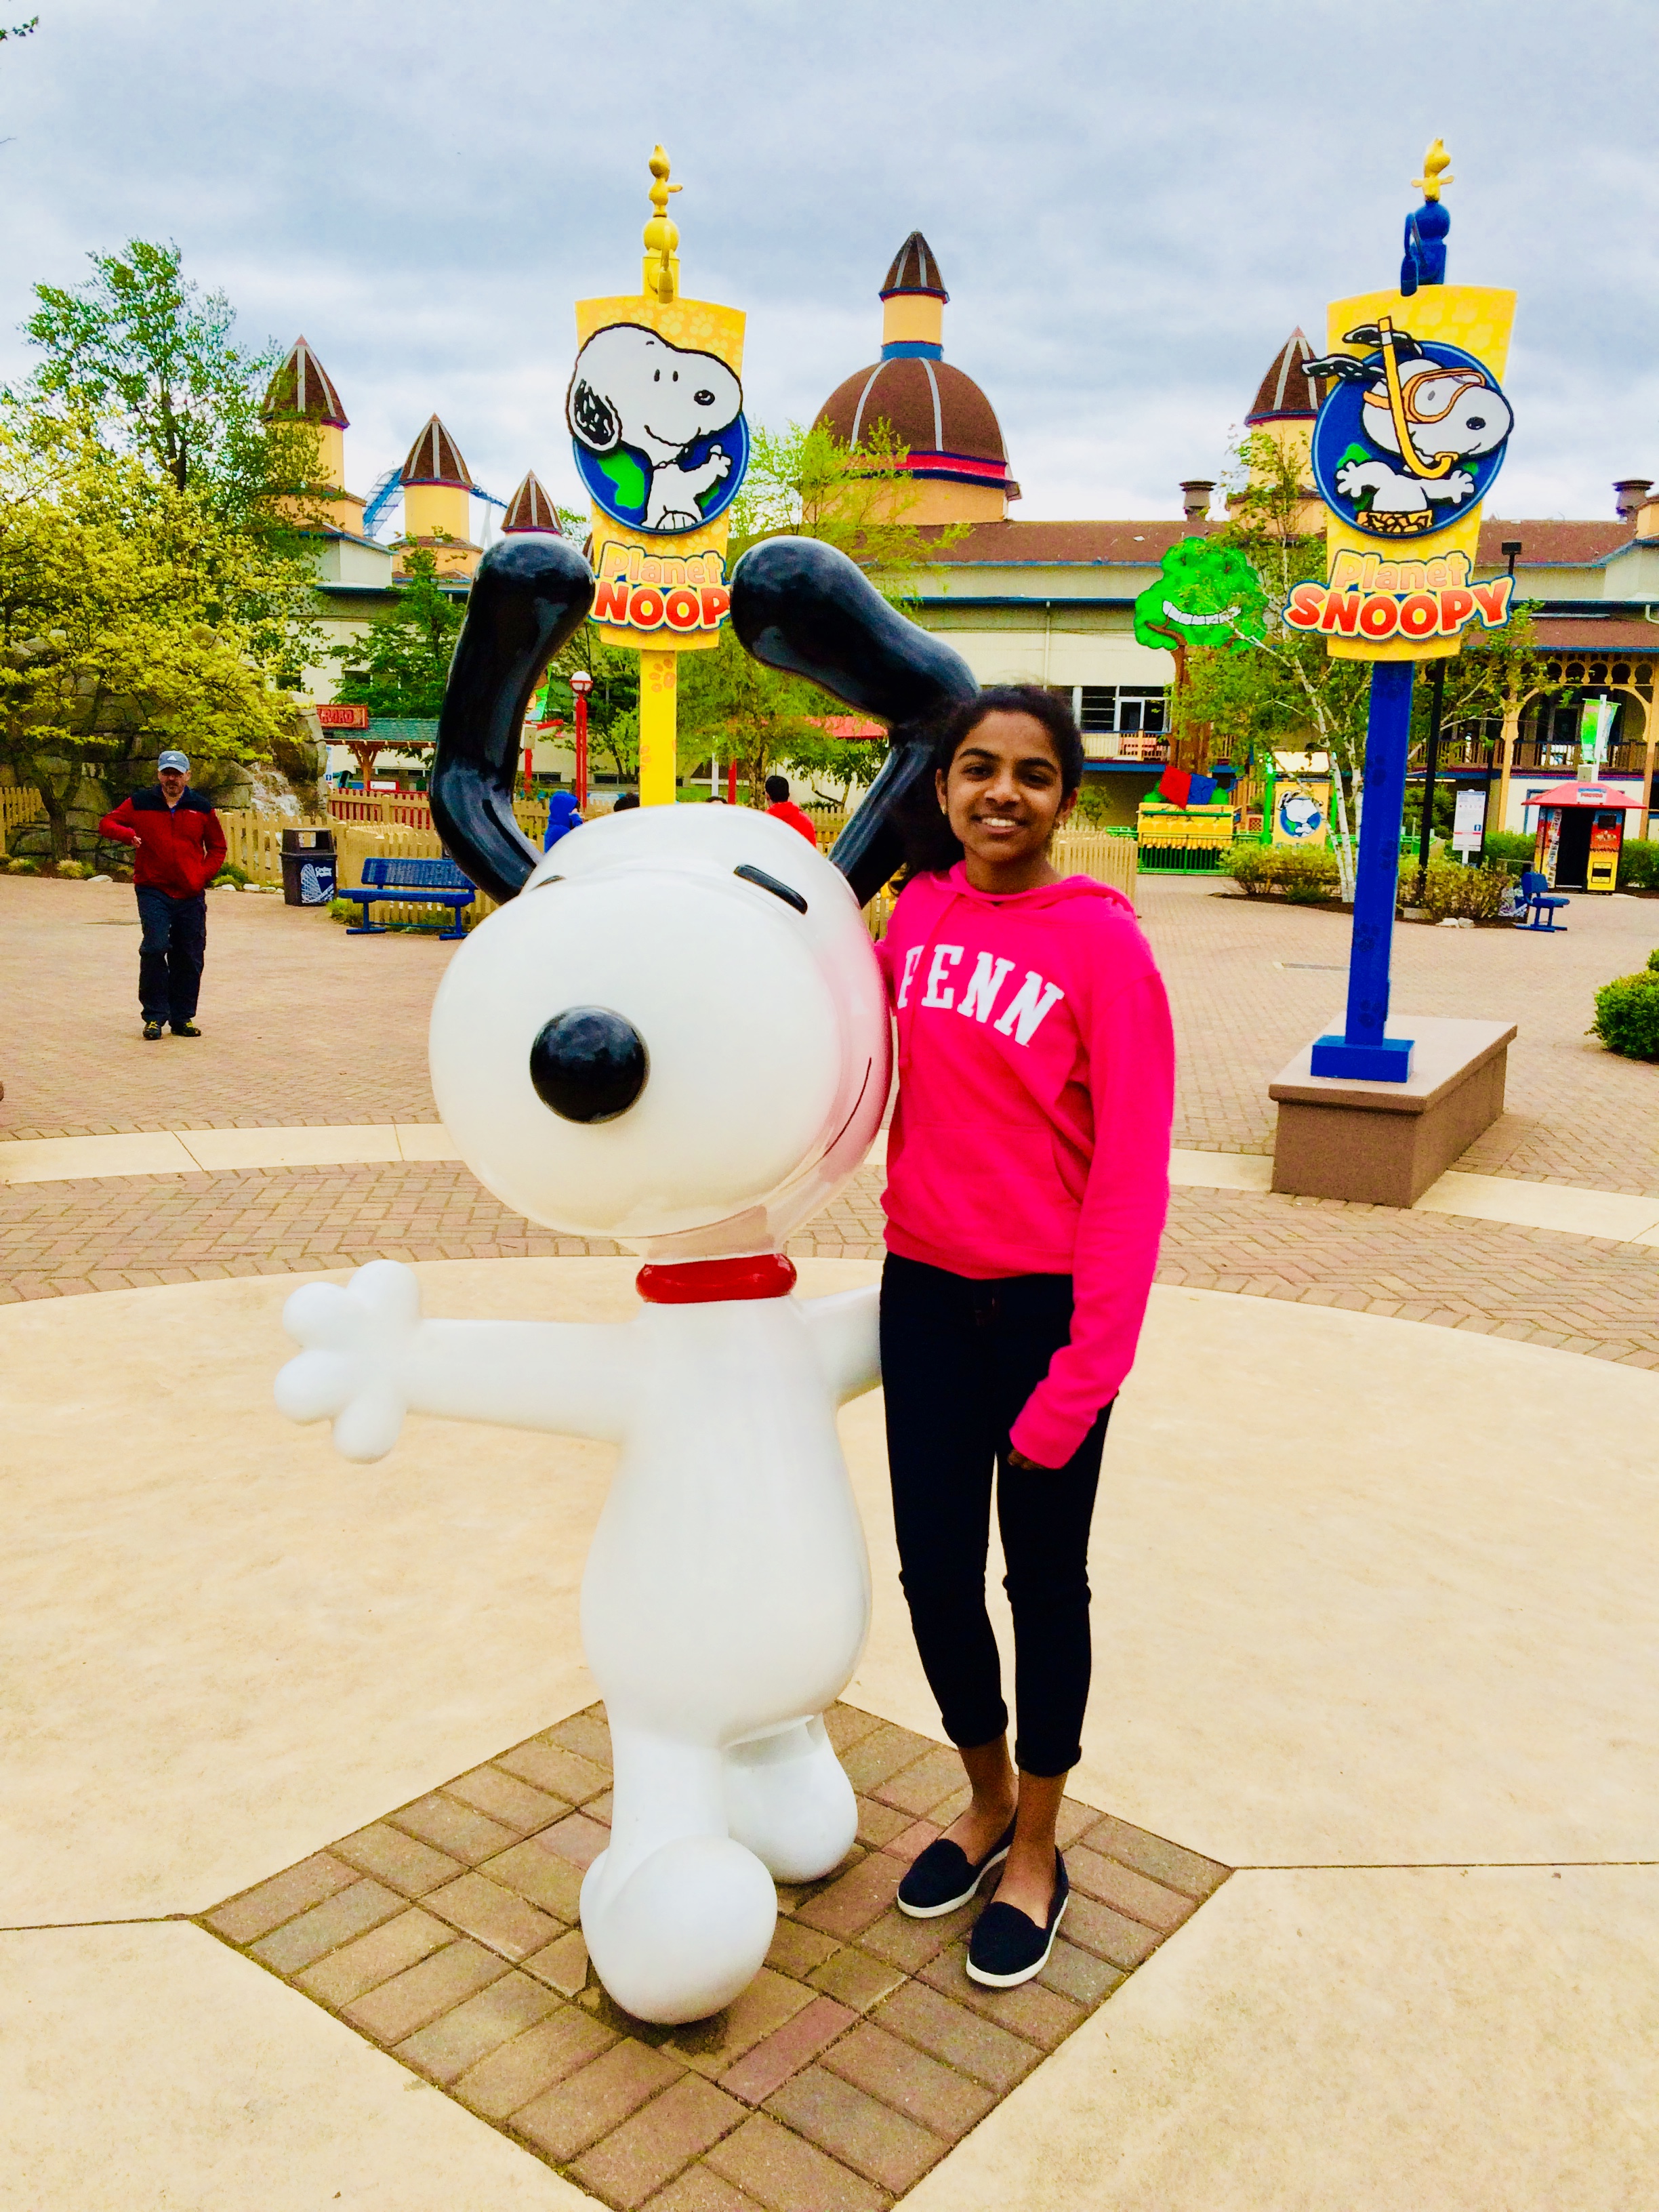 Picture at Cedarpoint with Snoopie